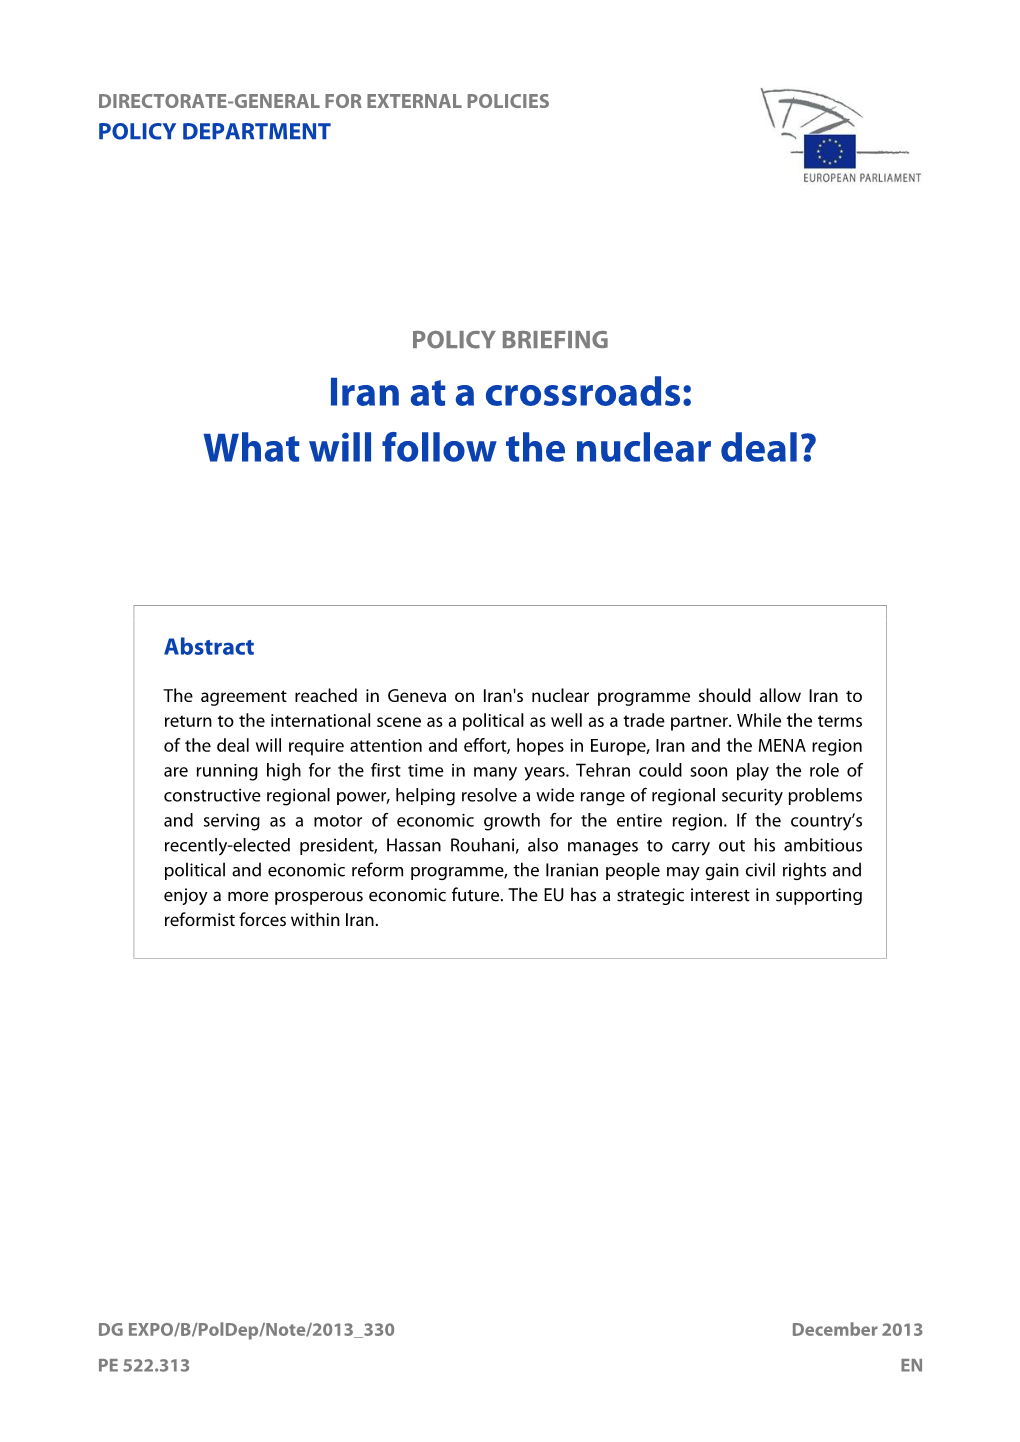 Iran at a Crossroads: What Will Follow the Nuclear Deal?